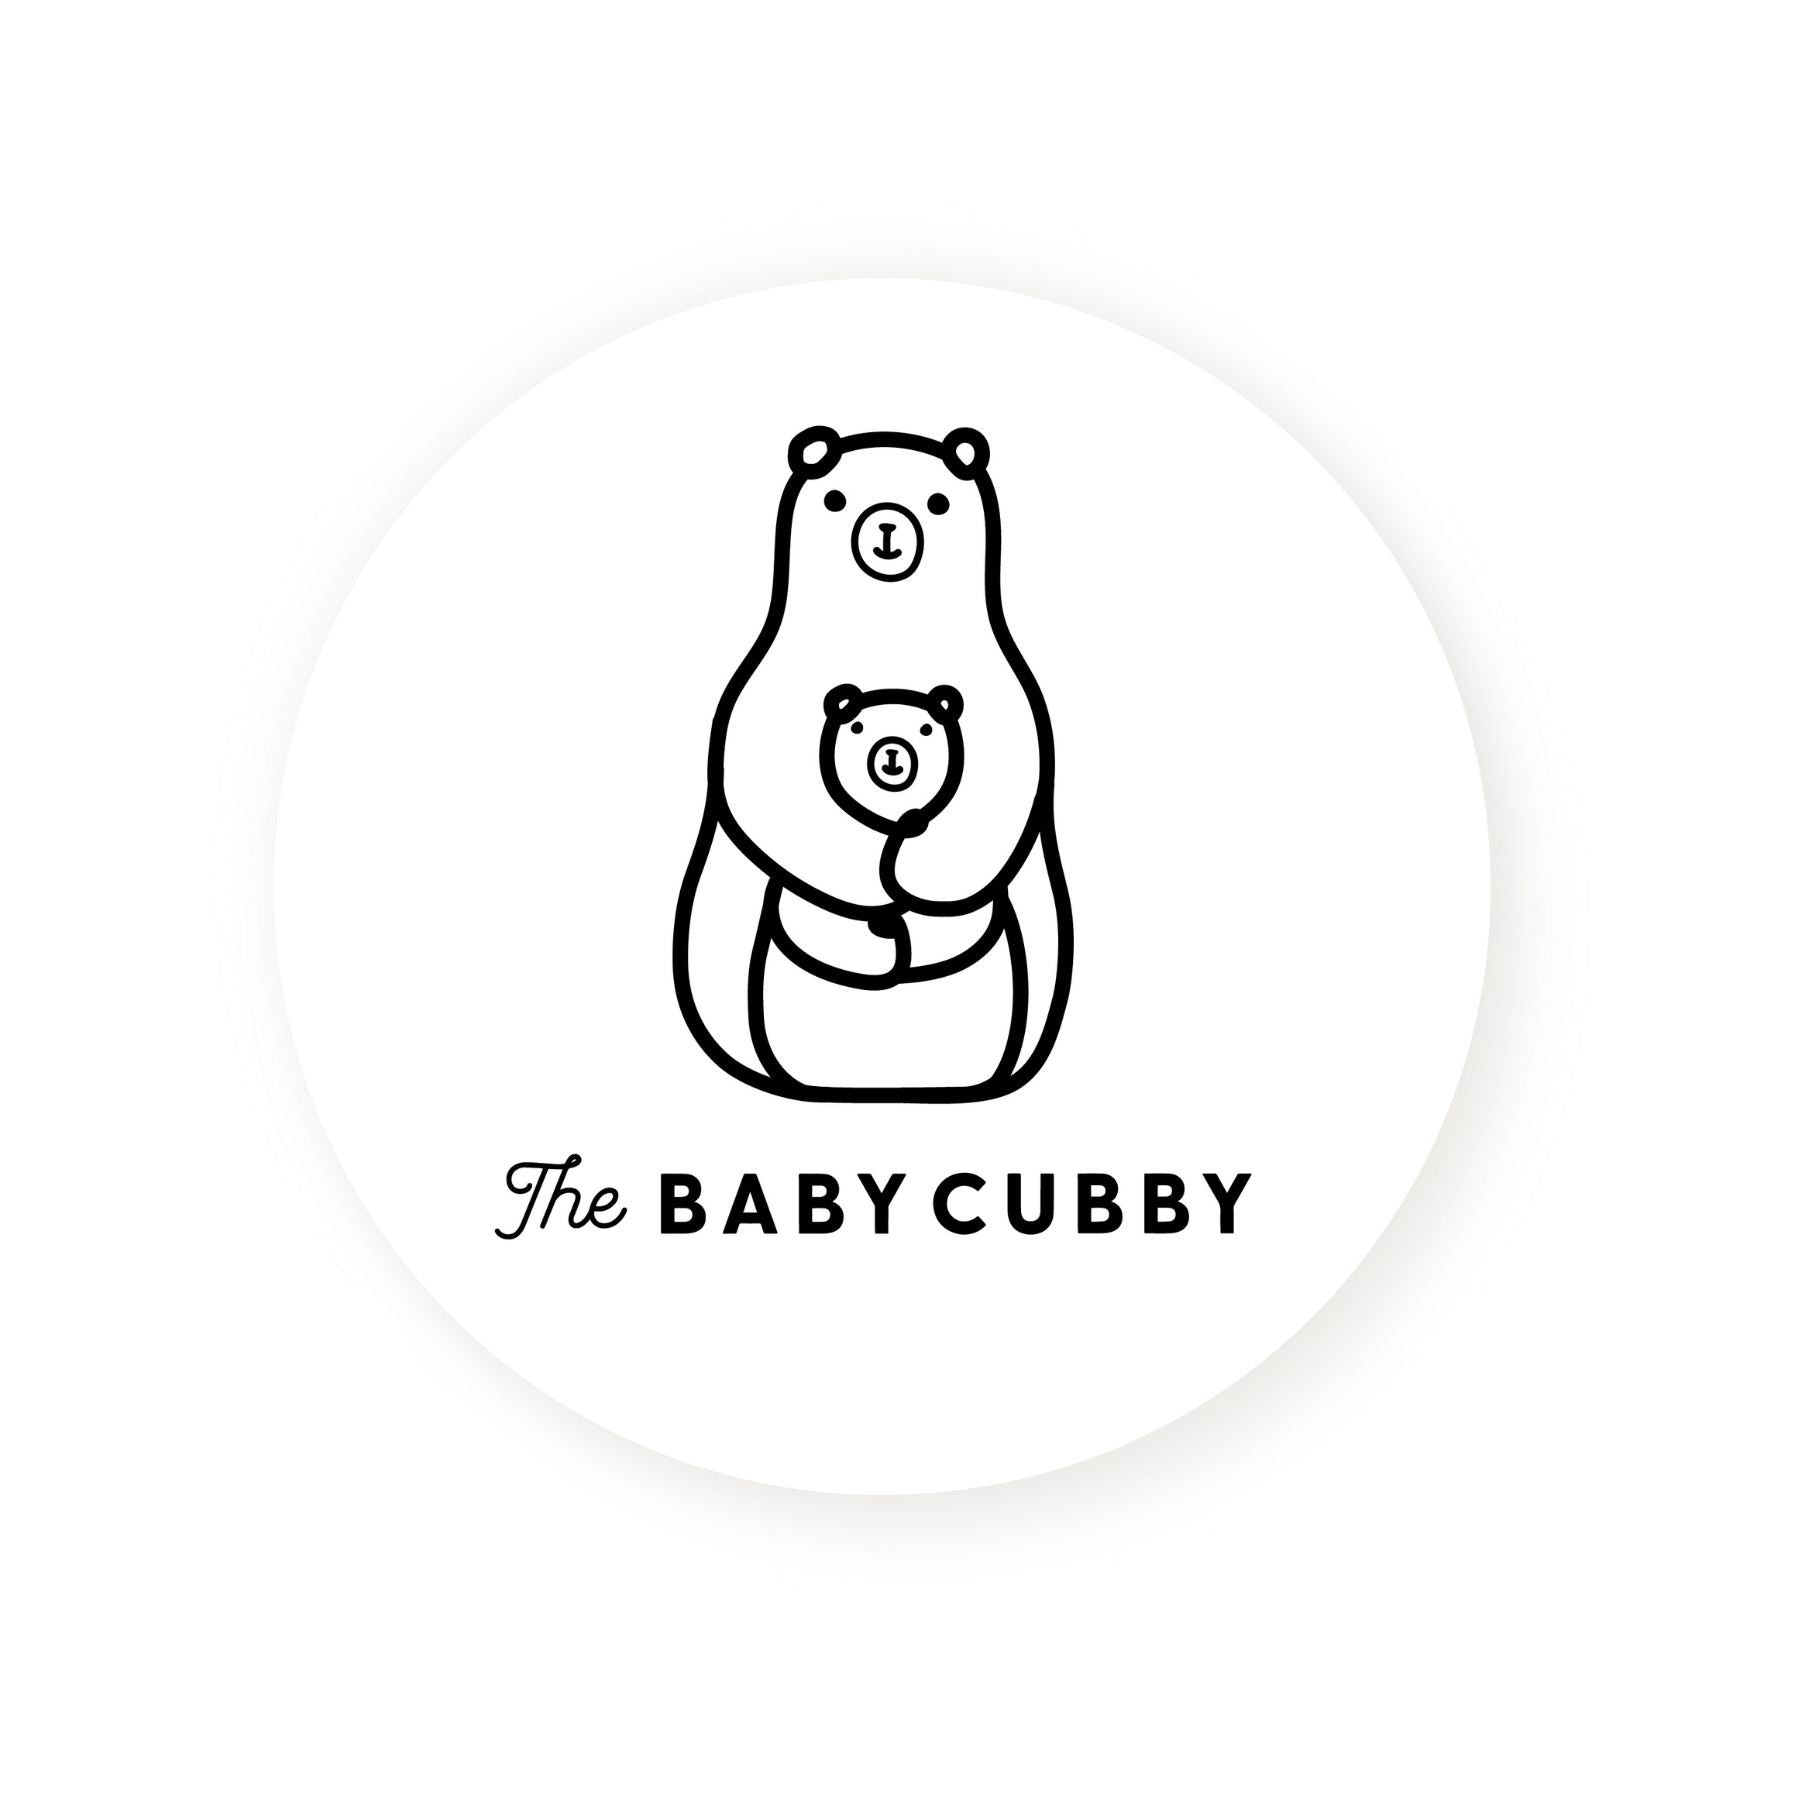 The Baby Cubby Cubby Bear Sticker - White / Black